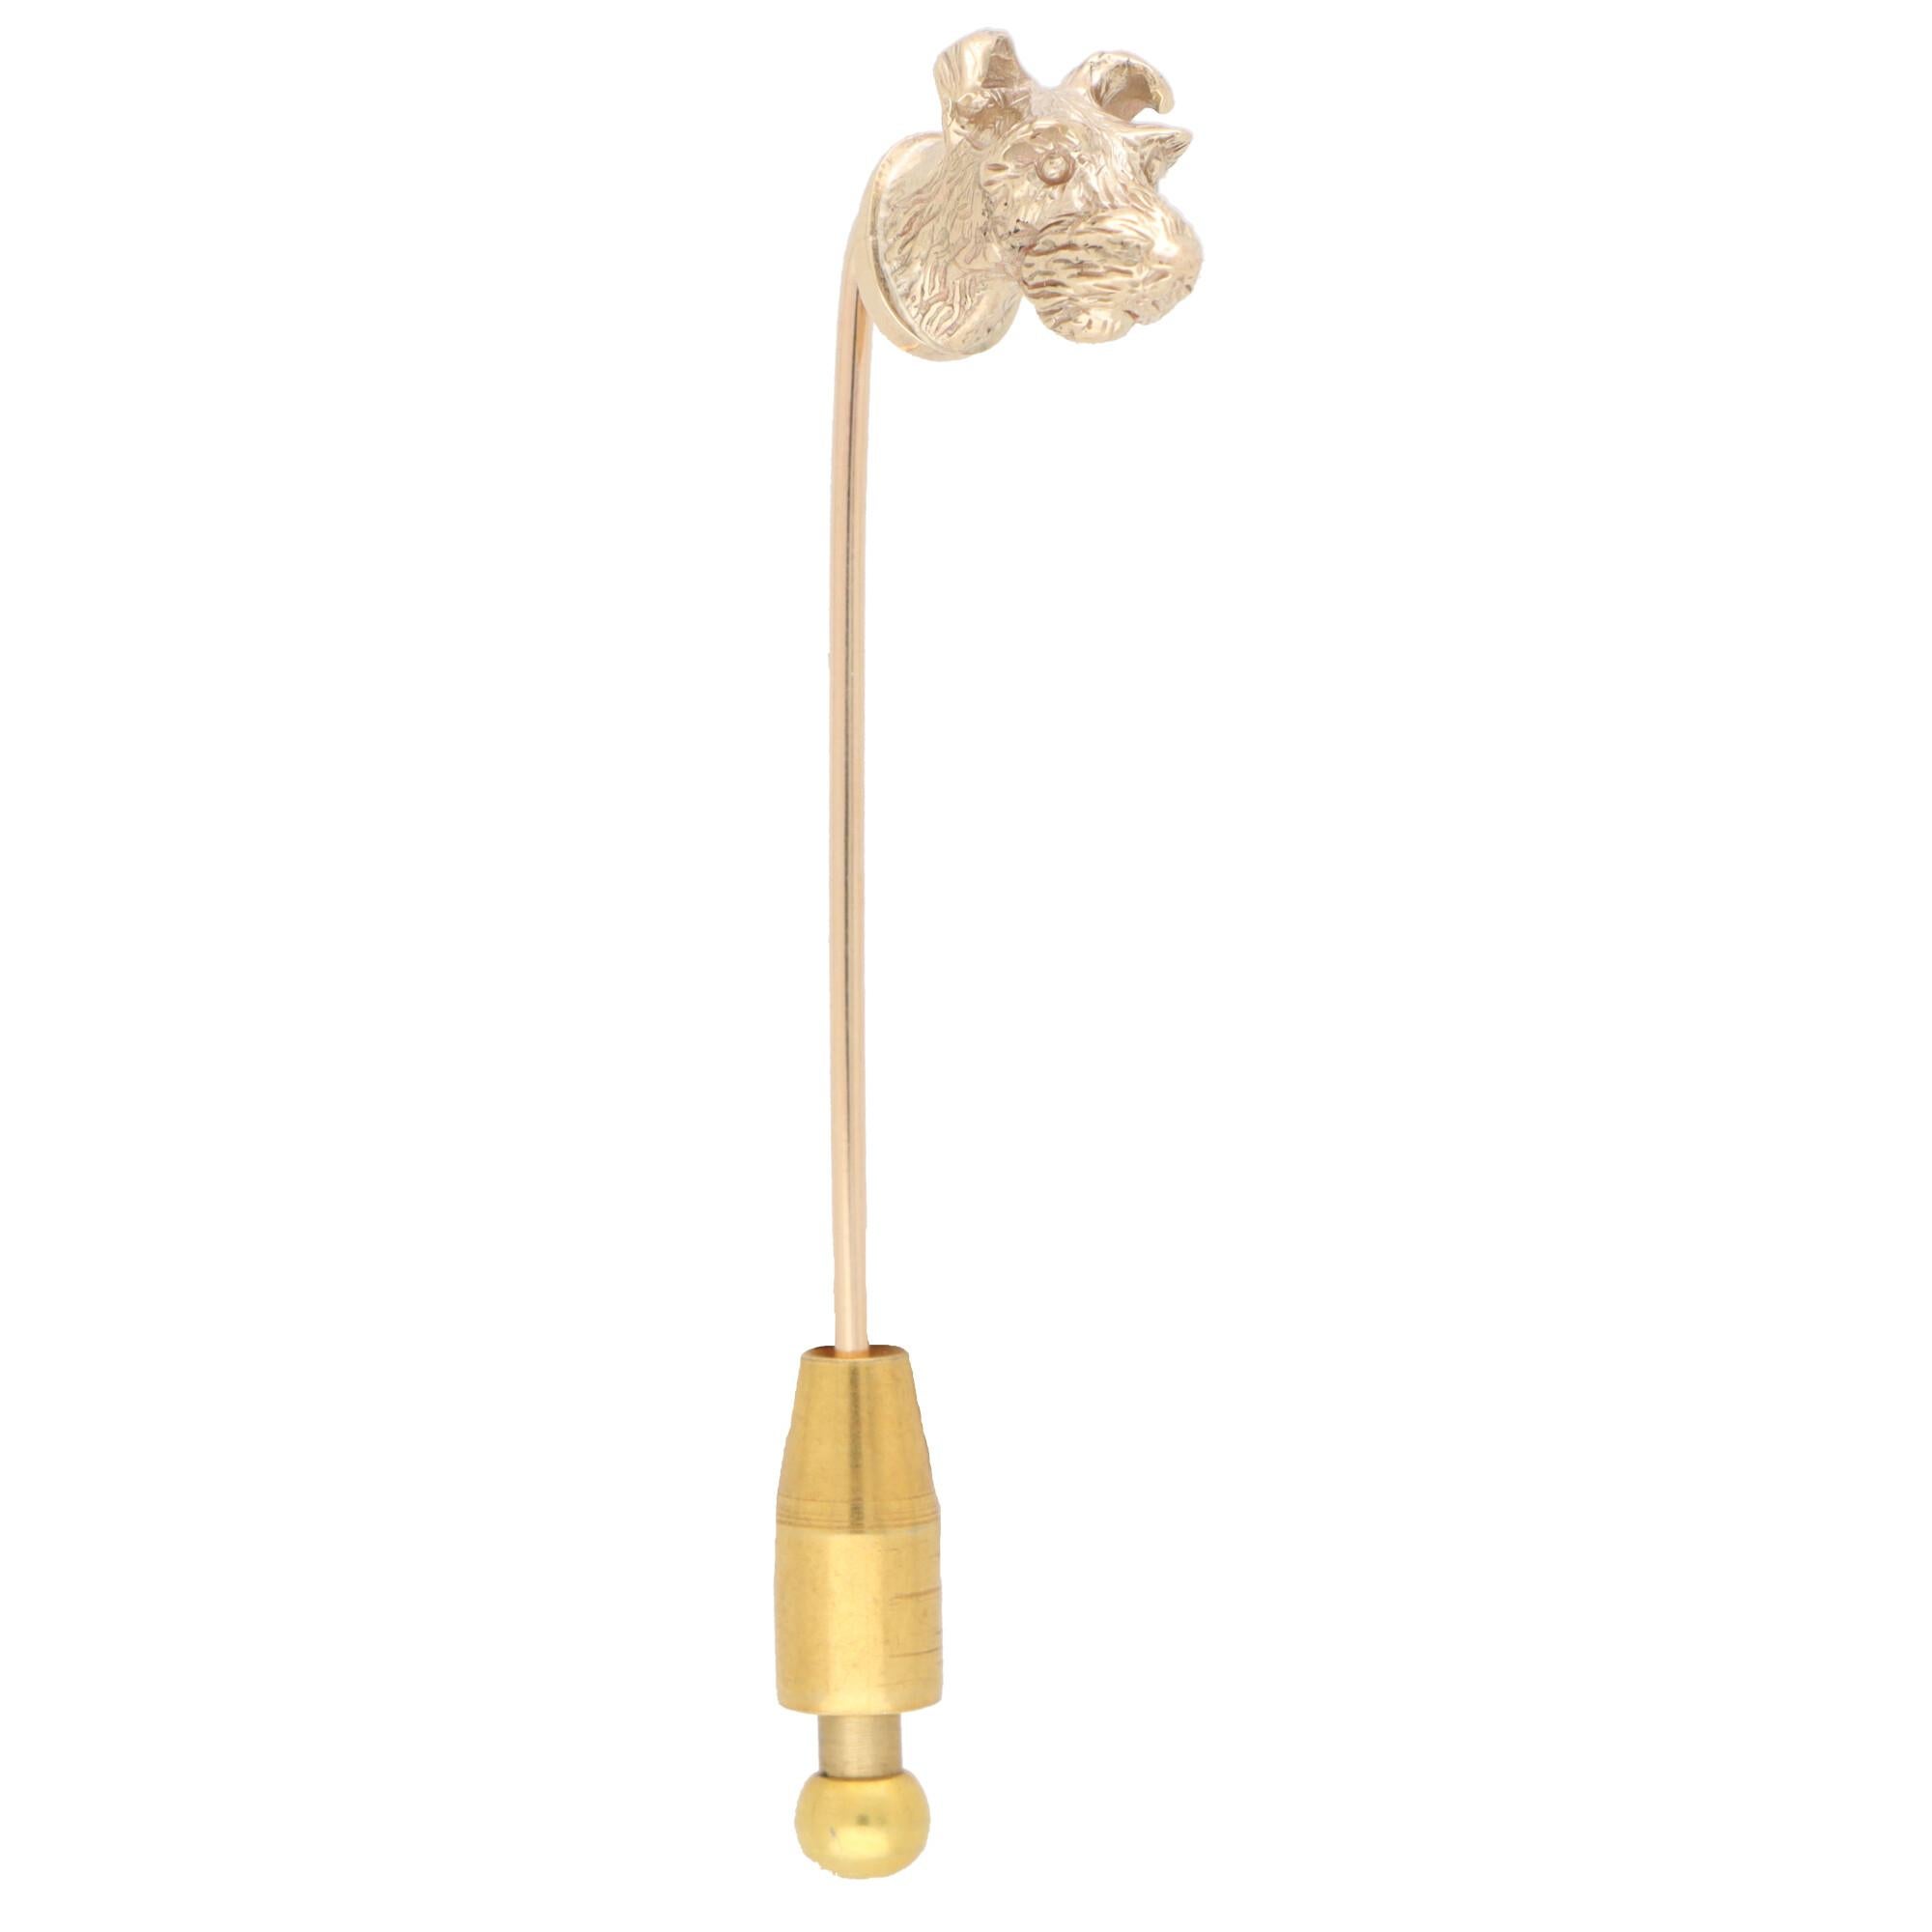 Retro Terrier Dog Head Stick Pin Set in Solid 9k Yellow Gold For Sale